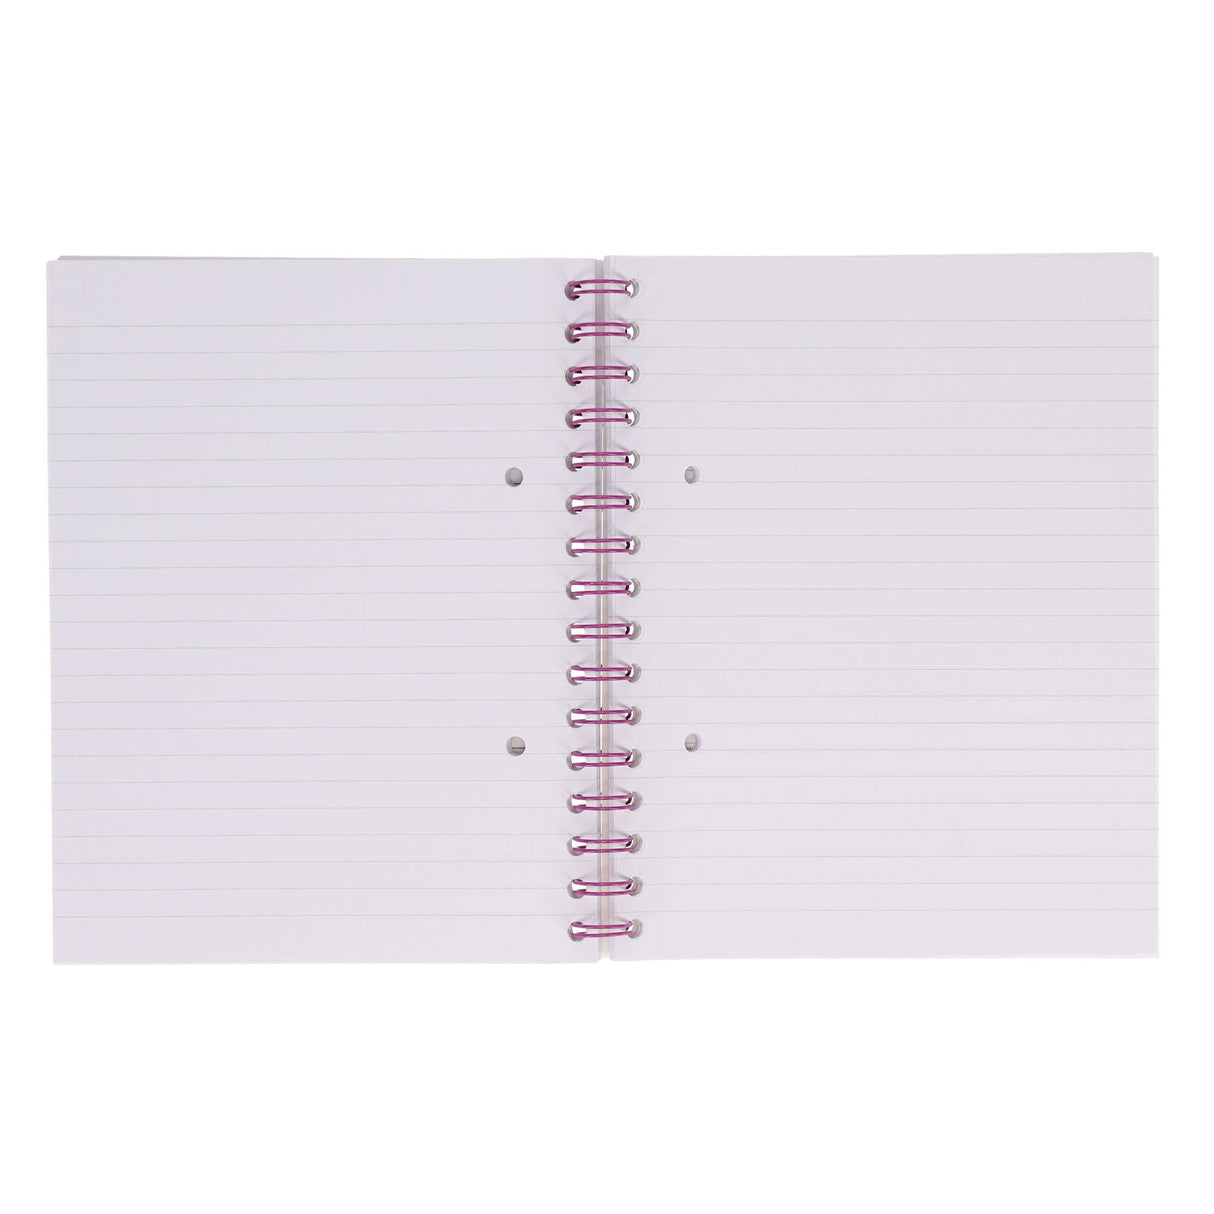 Premto A5 Wiro Notebook - 200 Pages - Printer Blue-A5 Notebooks- Buy Online at Stationery Shop UK